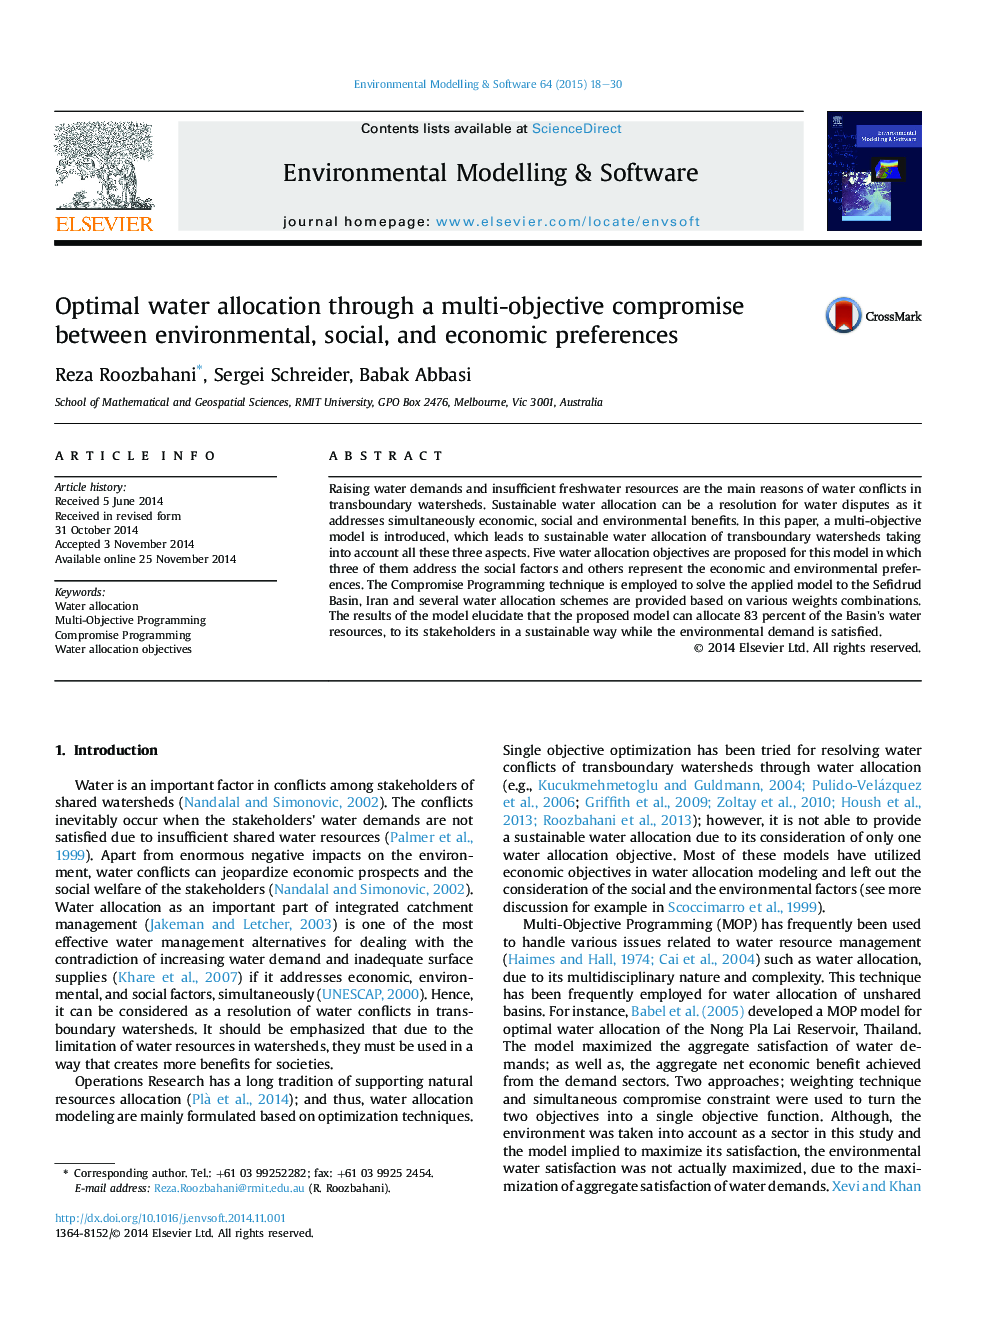 Optimal water allocation through a multi-objective compromise between environmental, social, and economic preferences